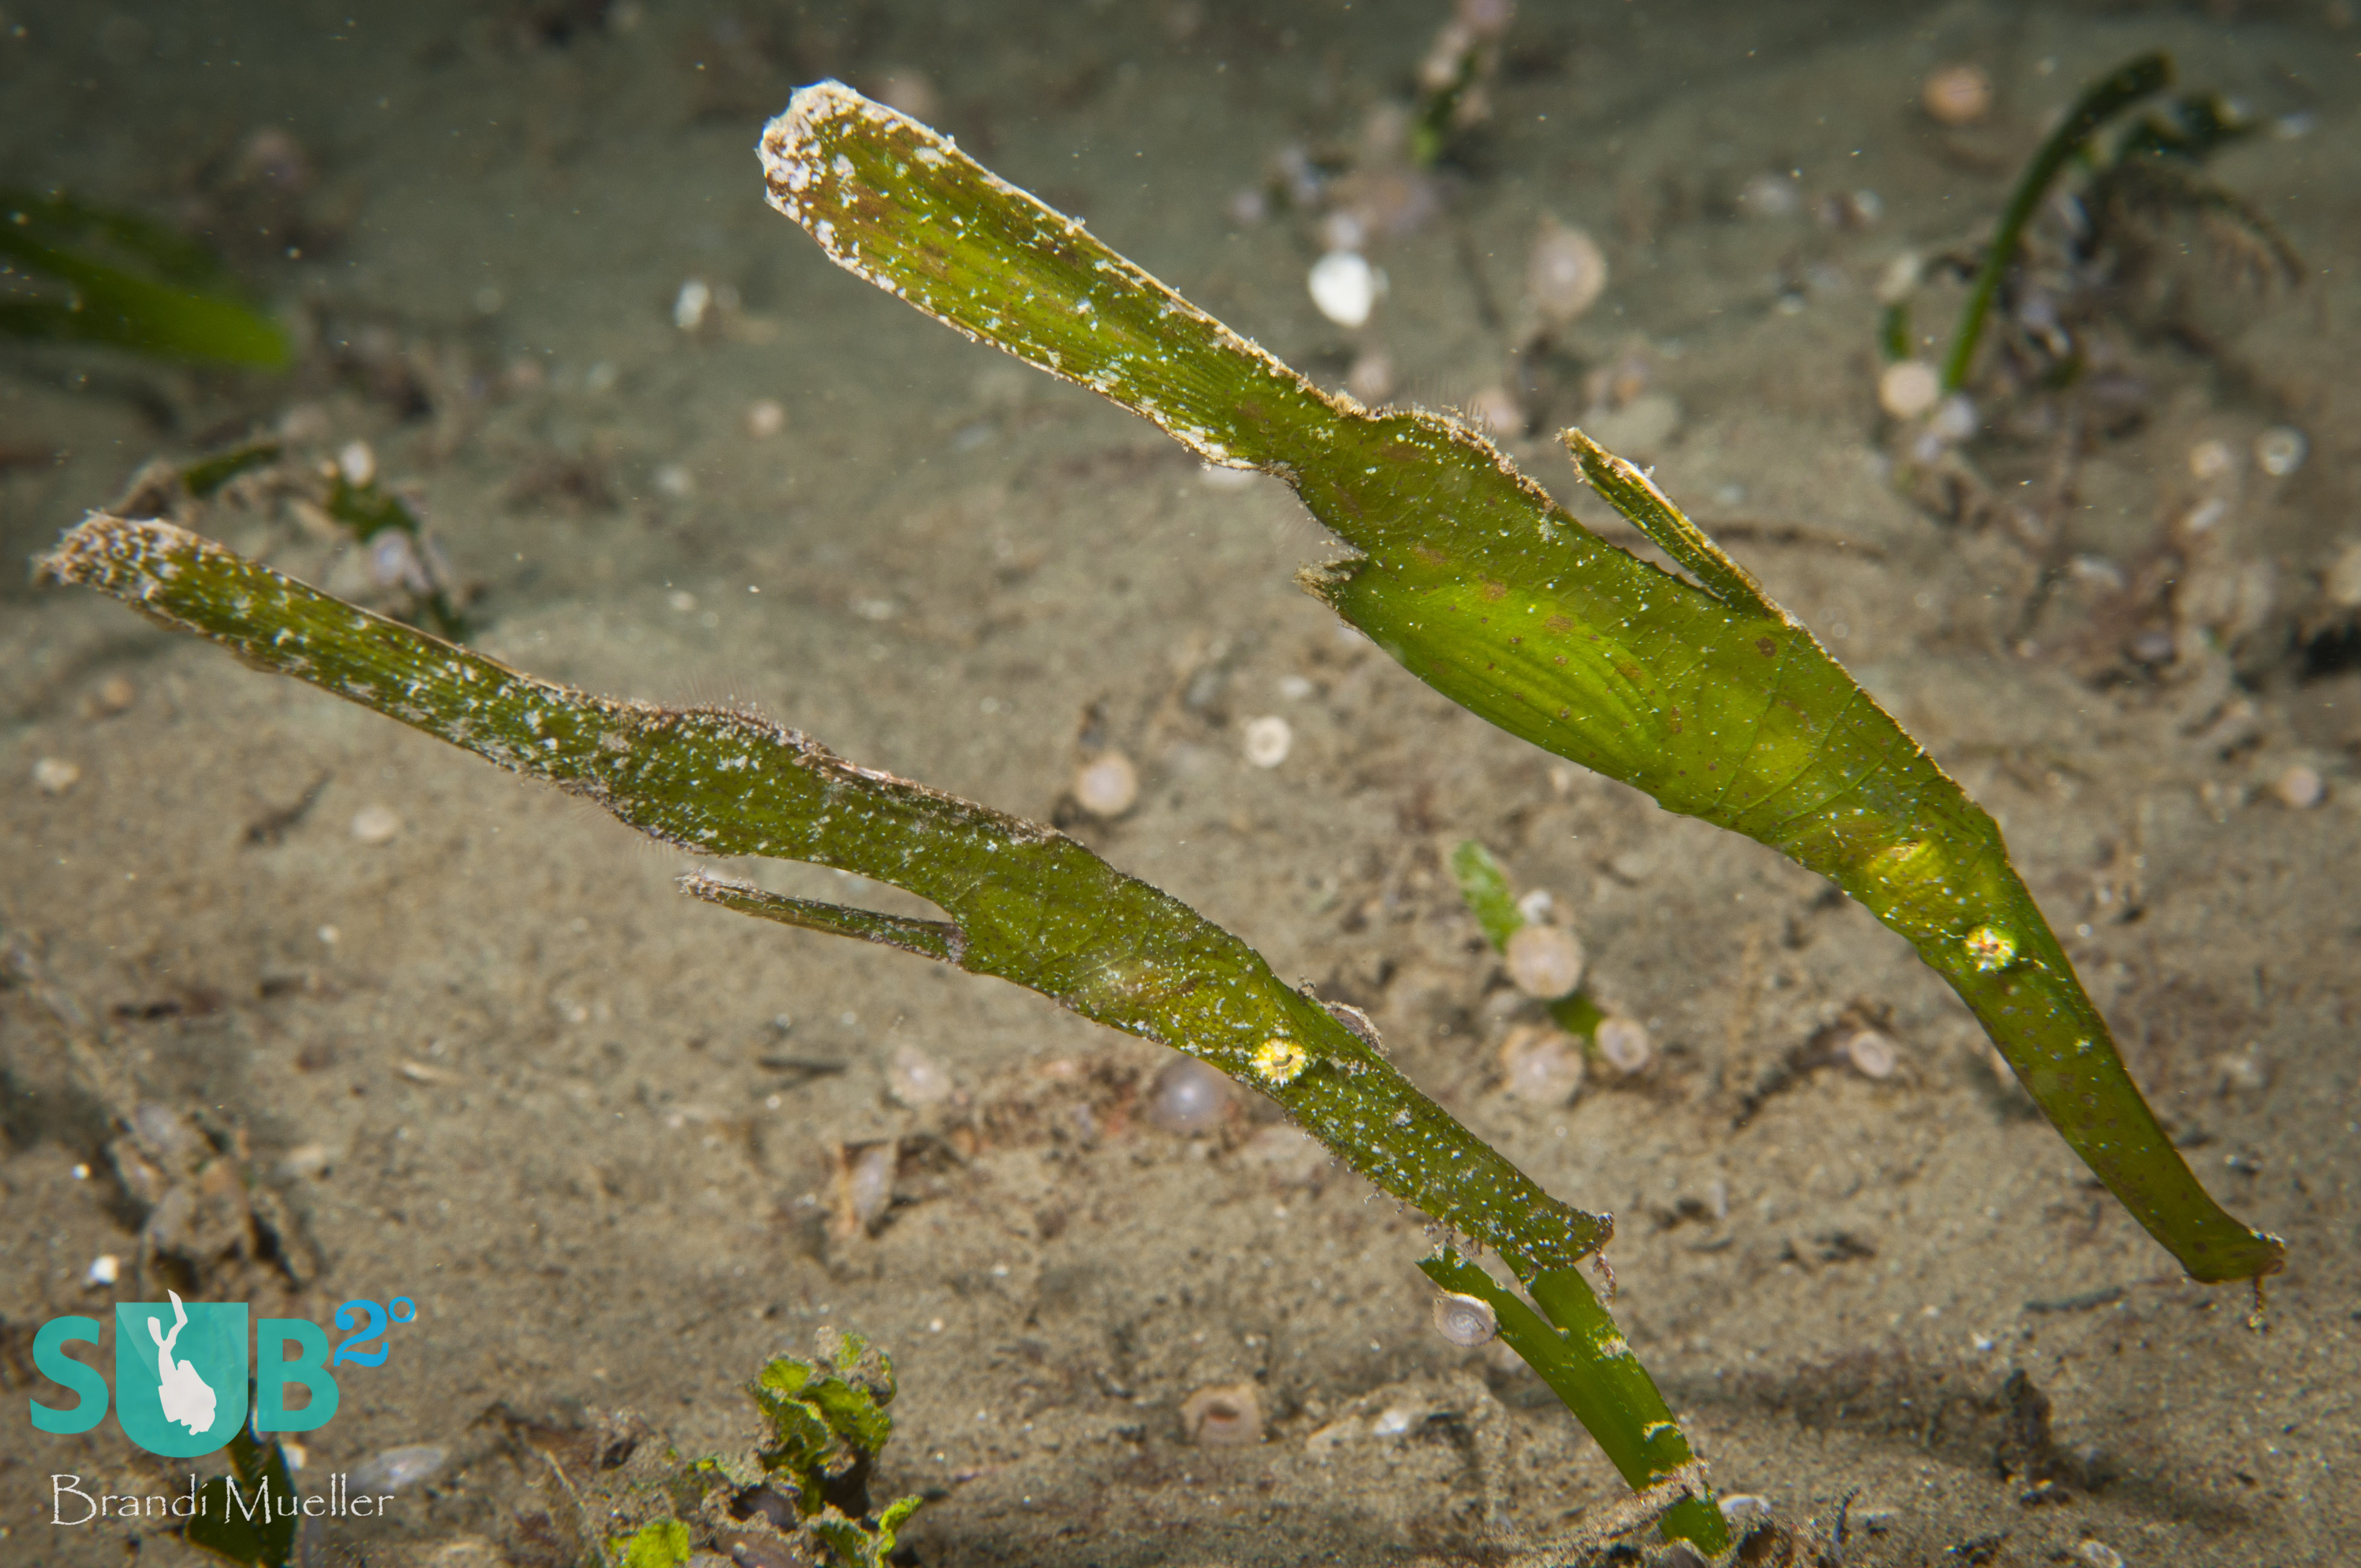 A pair of robust ghost pipefish, easily mistaken for the seaweed they like hide nearby. You need a keen eye to spot these masters of disguise. 